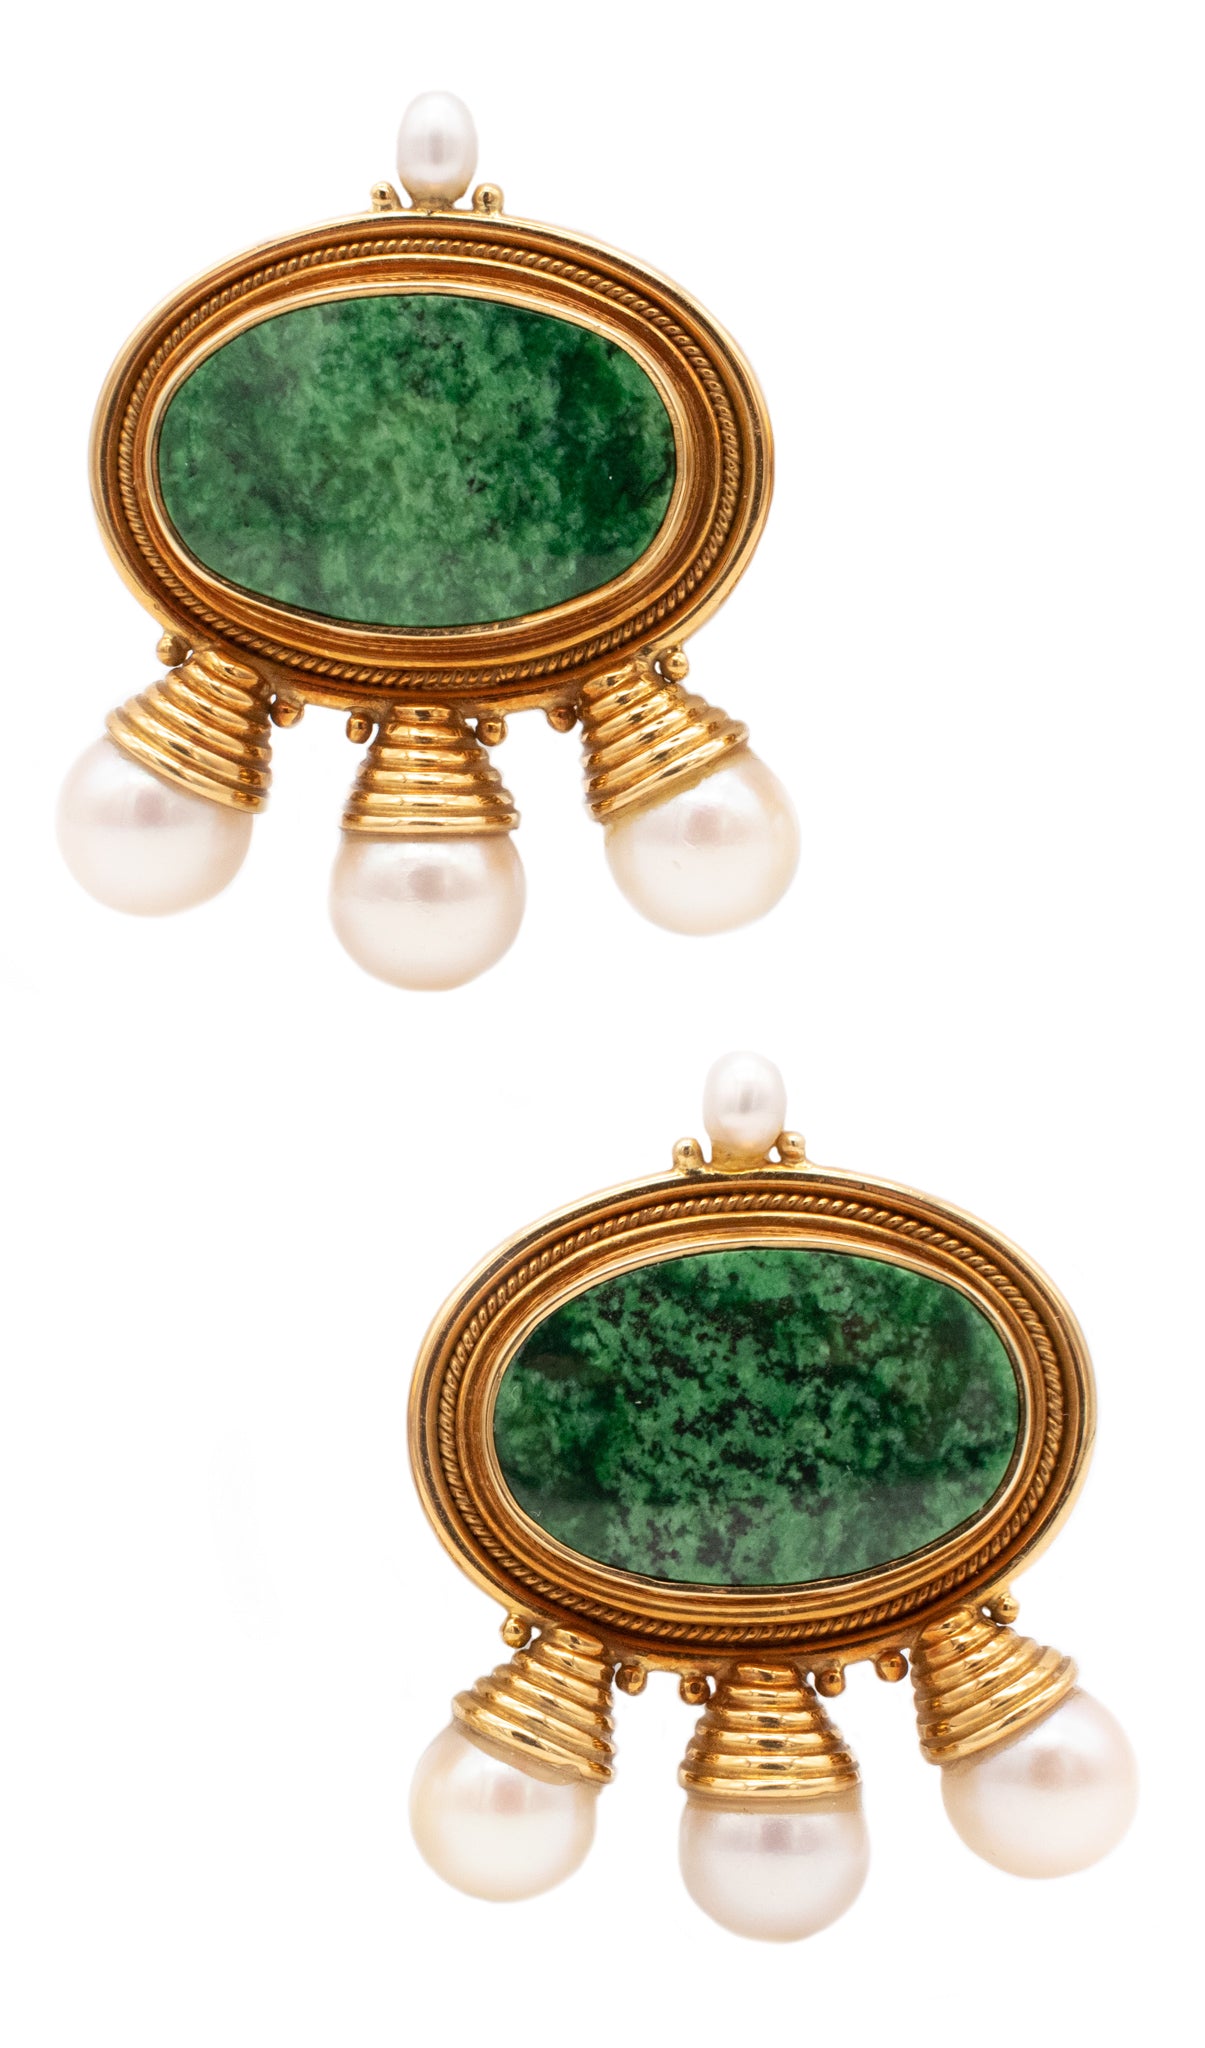 *Elizabeth Gage London 18 kt yellow gold clips-earrings with green turquoise and pearls